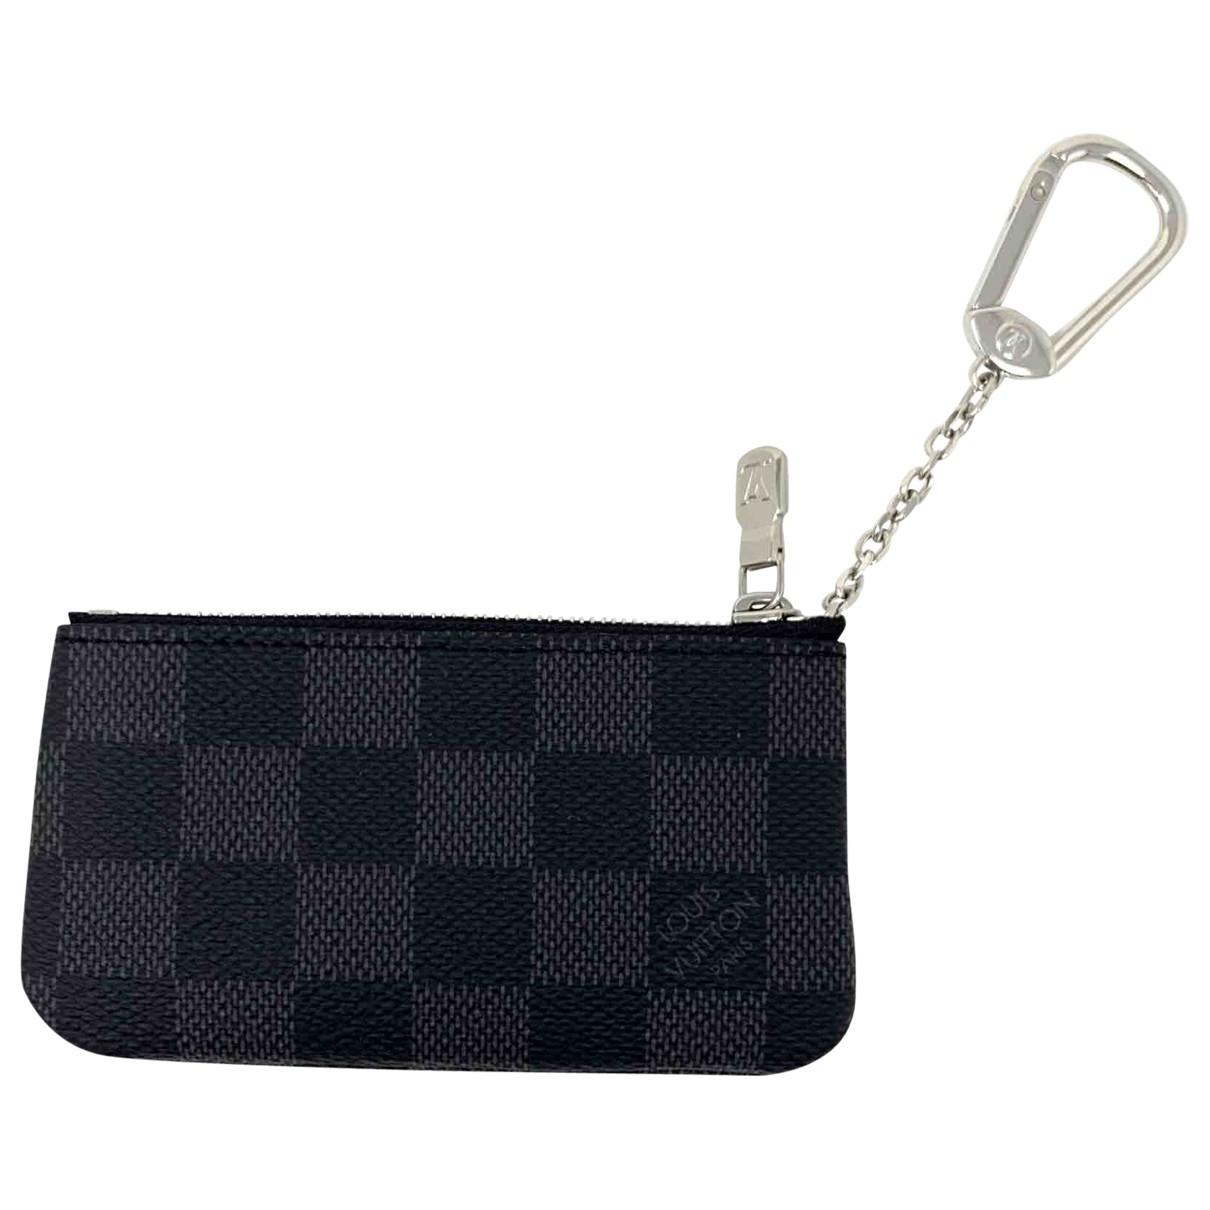 Louis Vuitton Key Pouch Black Cloth Small Bag, Wallets & Cases in Black for Men - Lyst